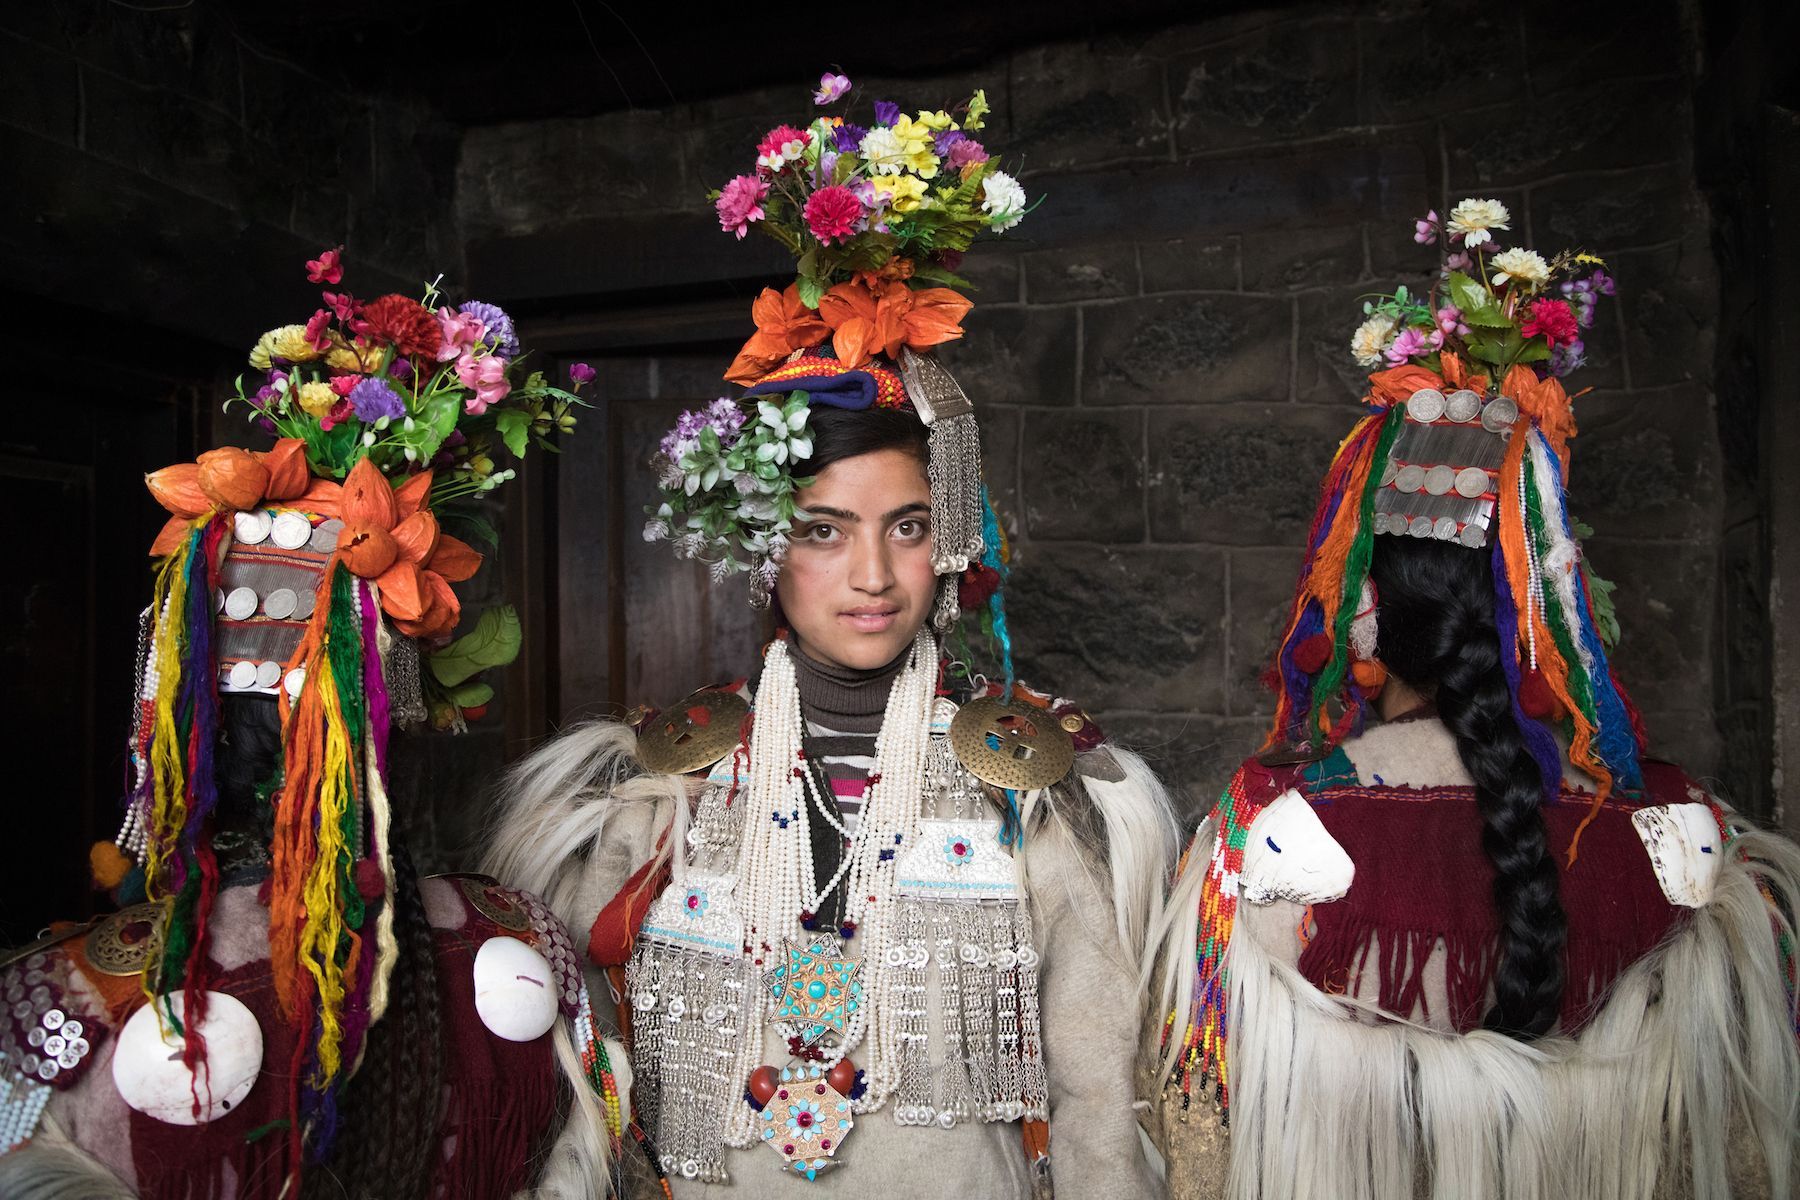 Ladakh Women's Project by Wild Images